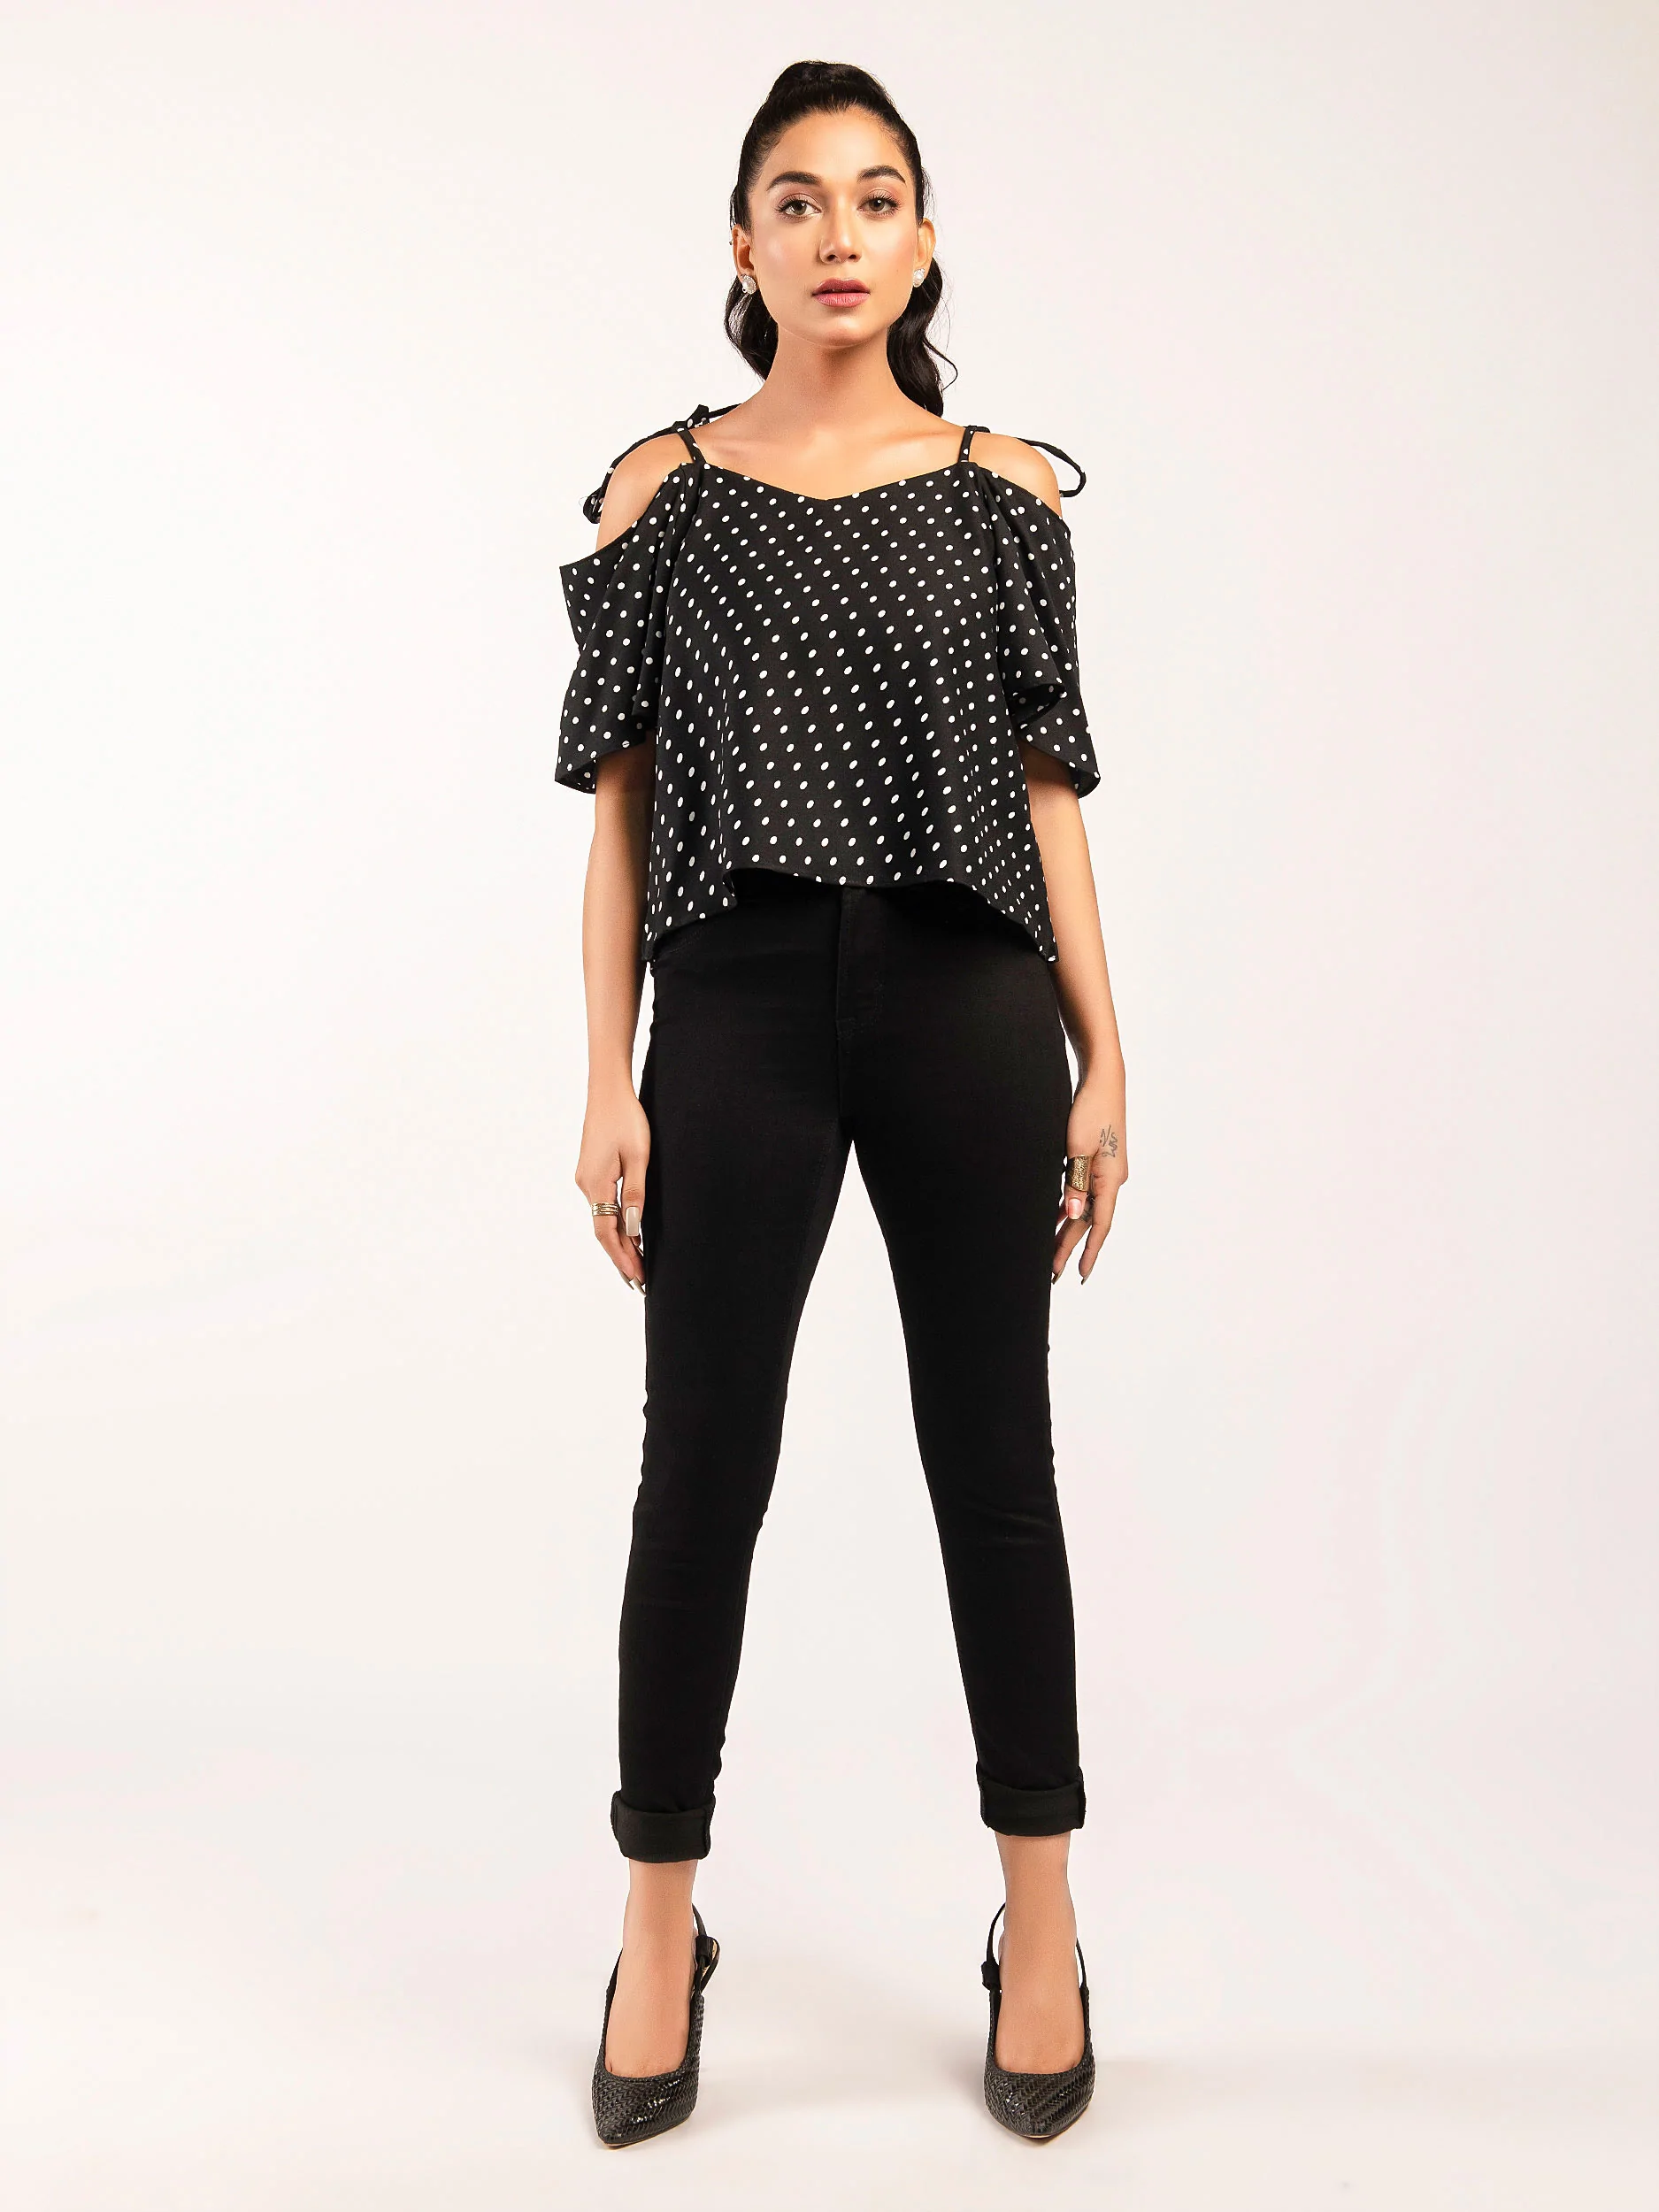 Polka Dot Top by limelight